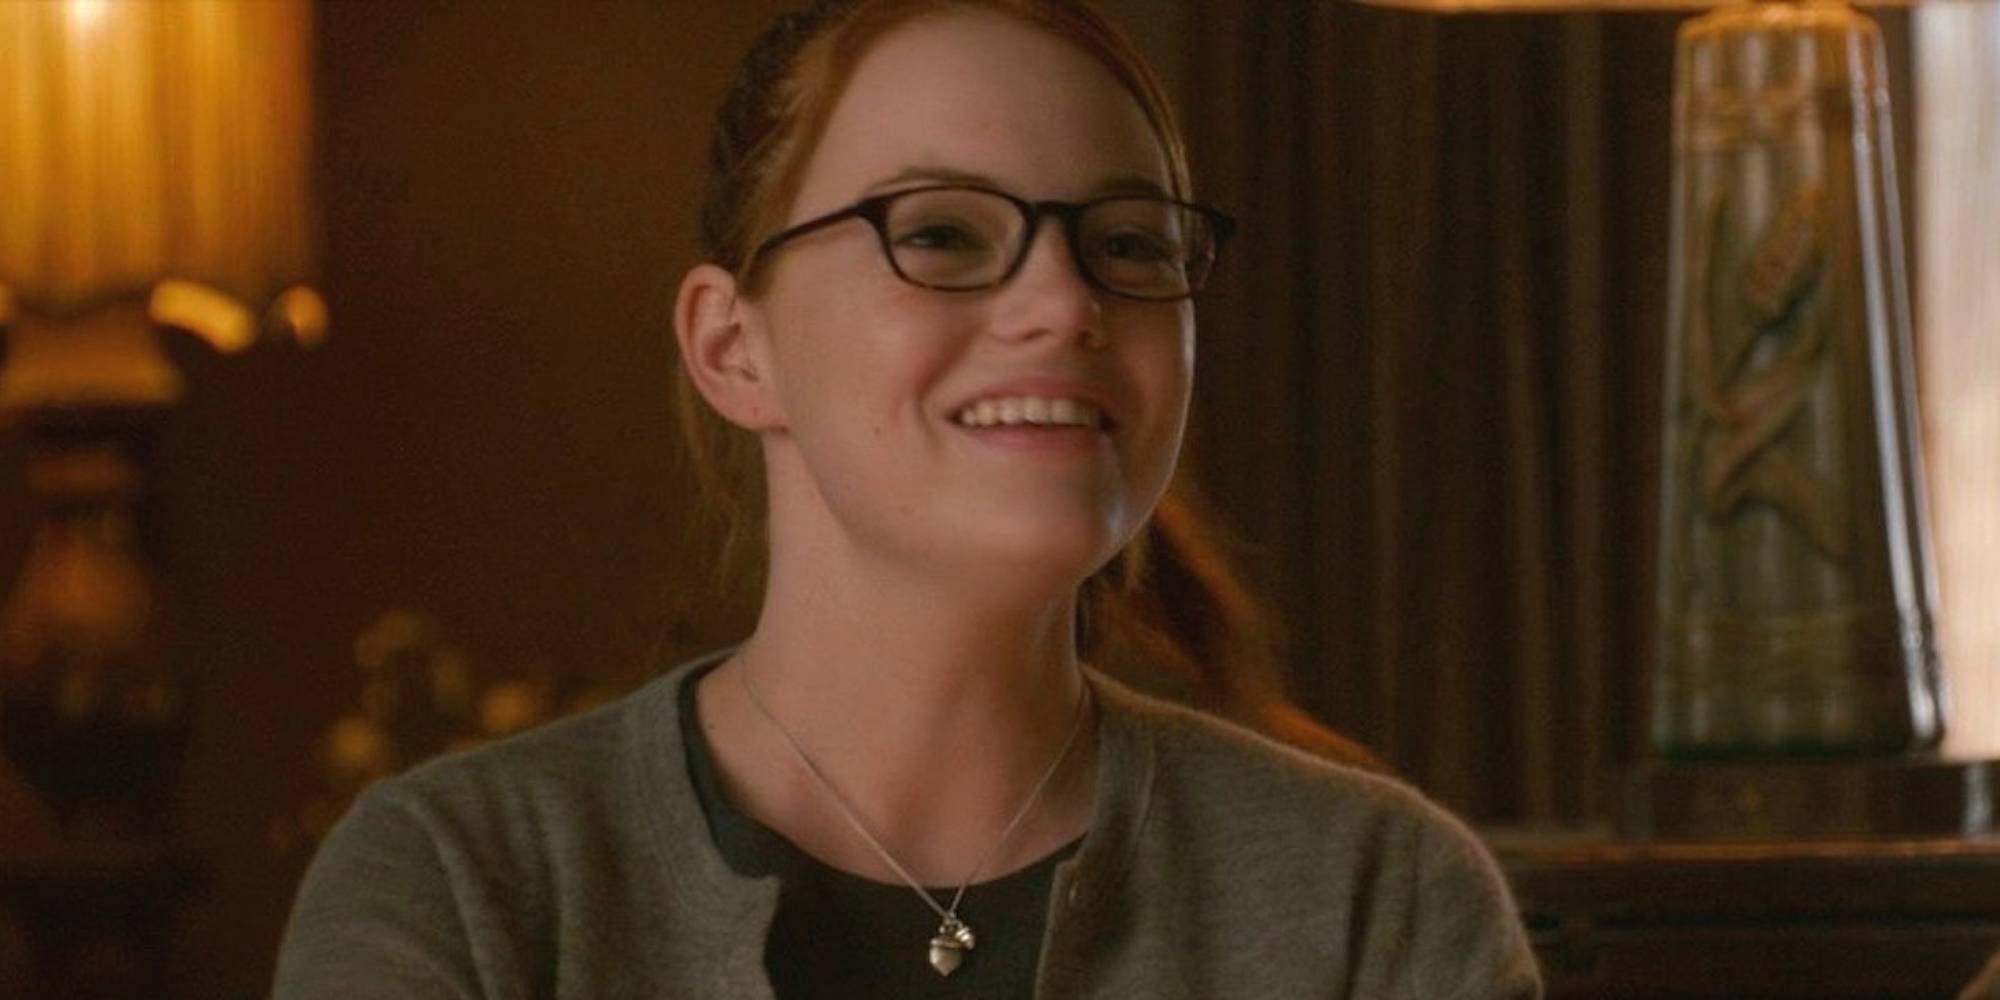 Emma Stone in The House Bunny smiling with eyeglasses on.